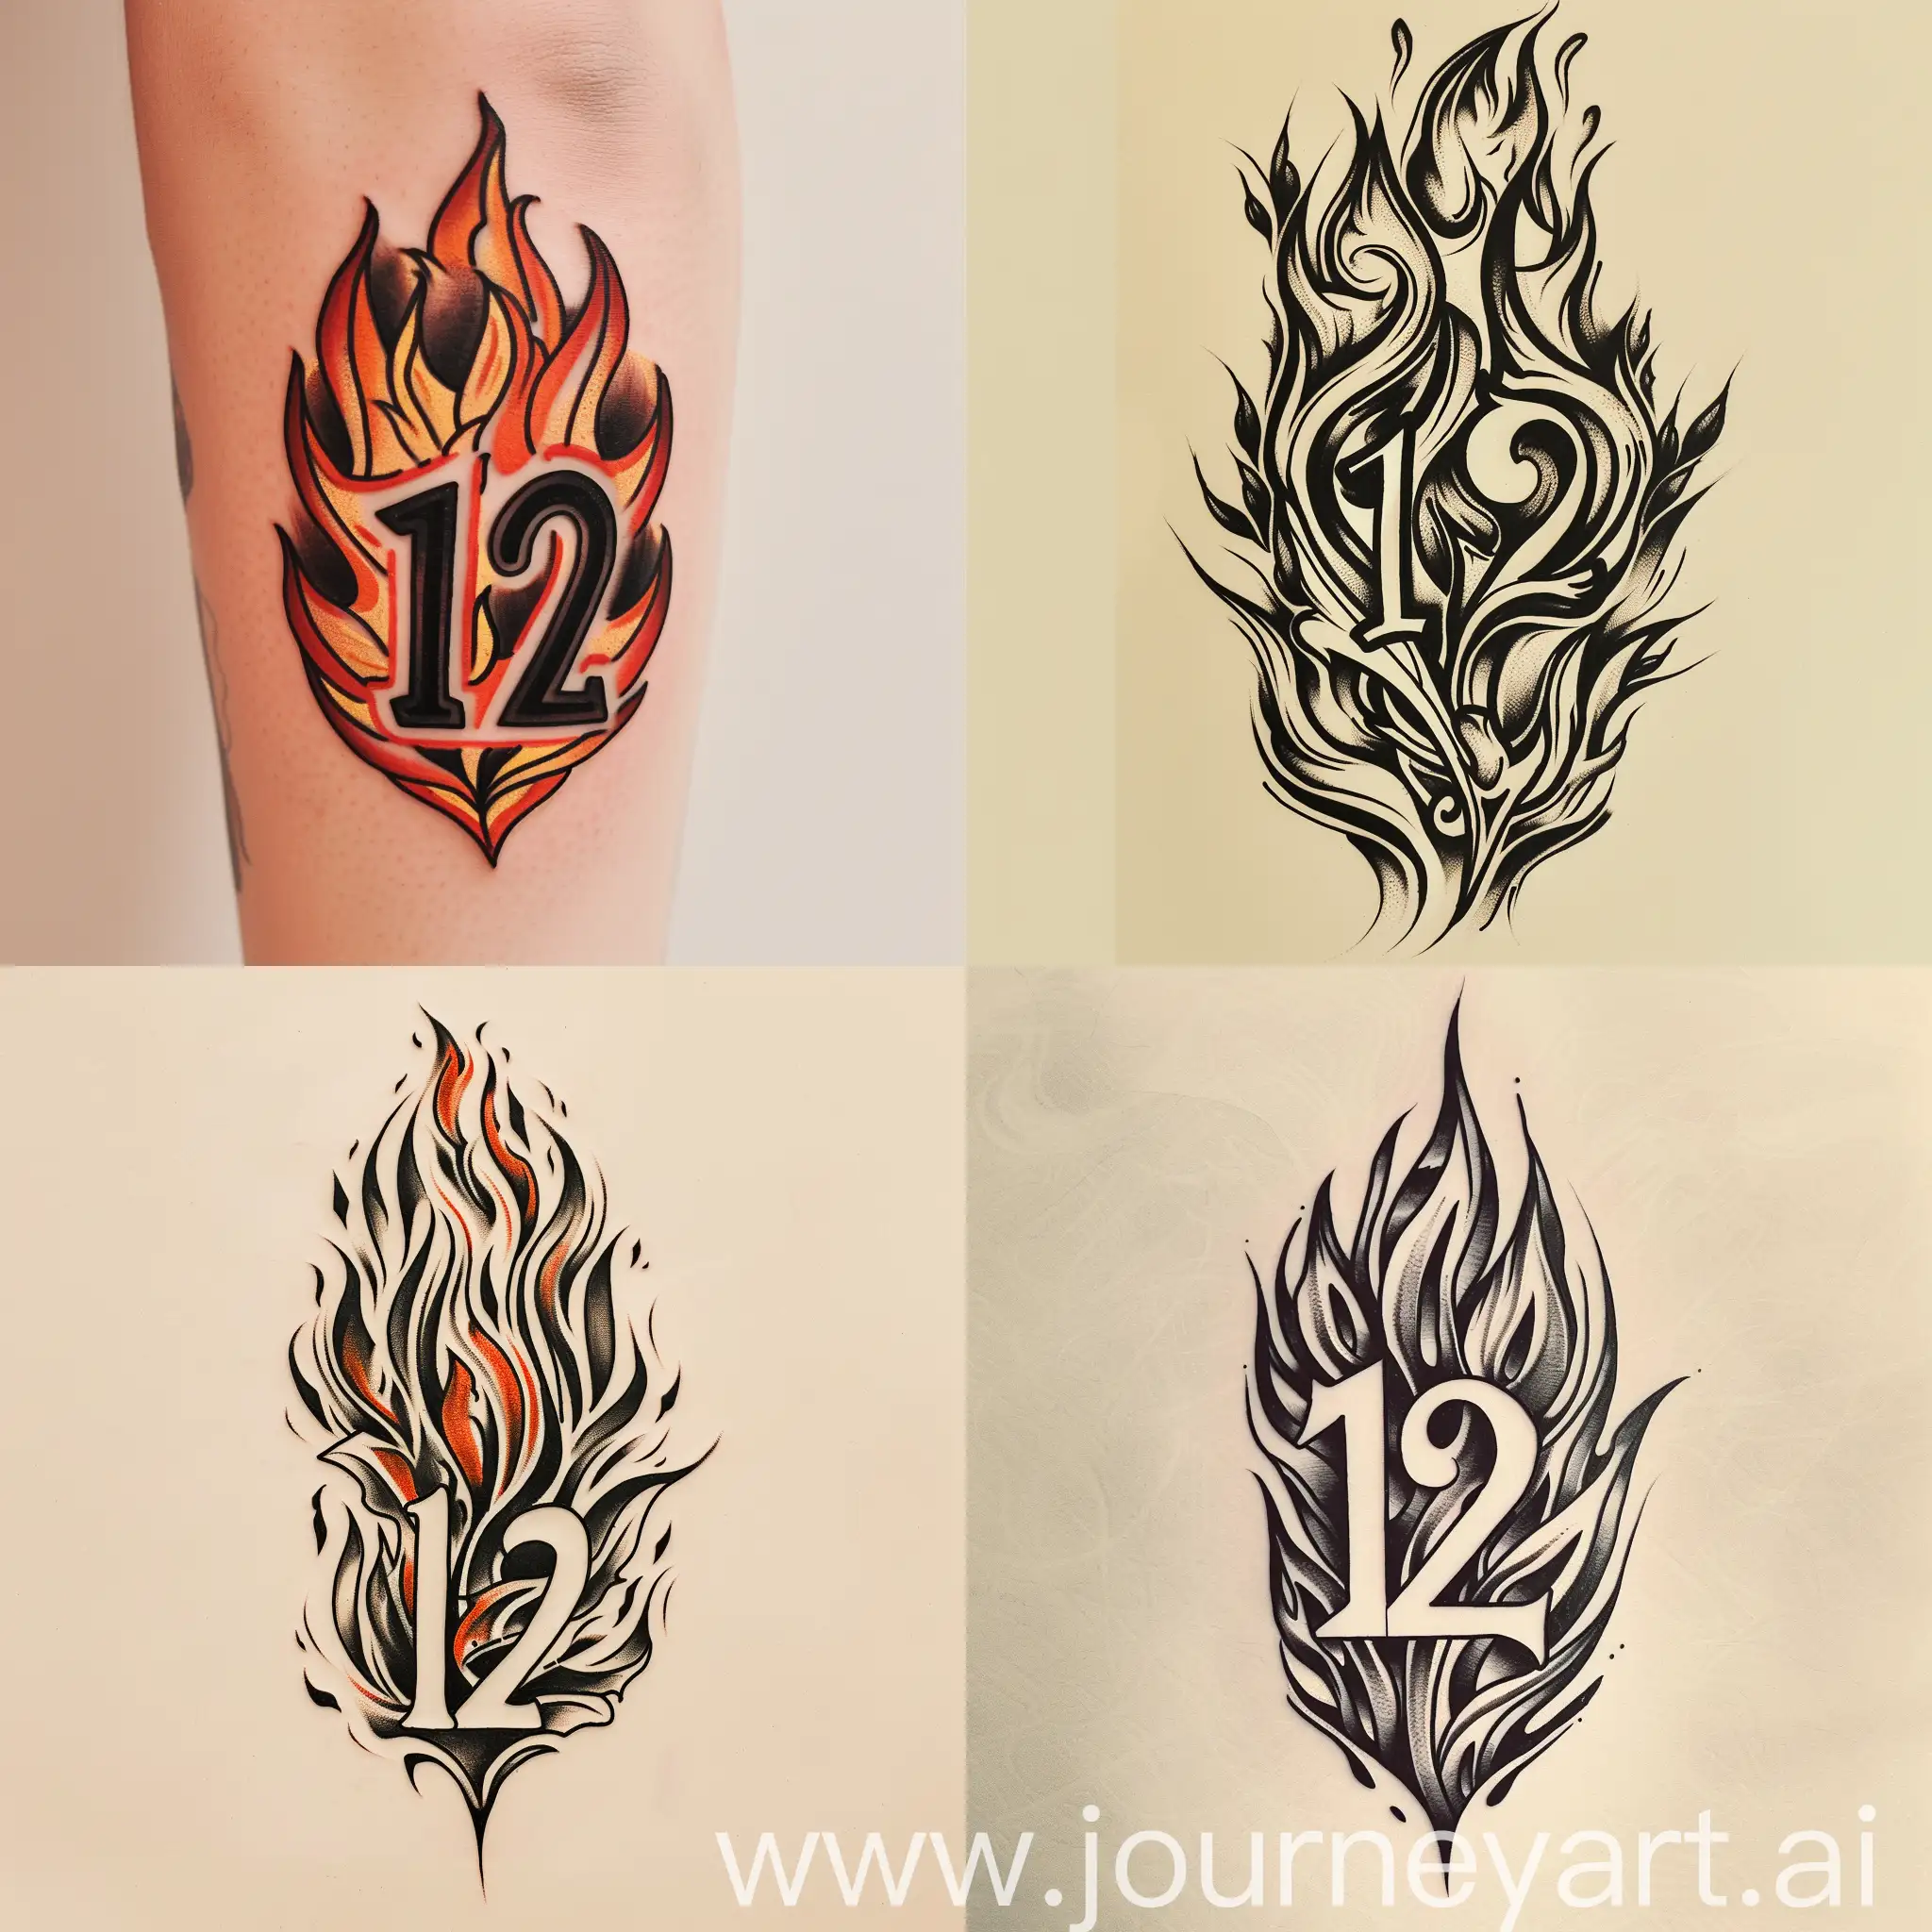 Bold-Number-12-Flame-Tattoo-Design